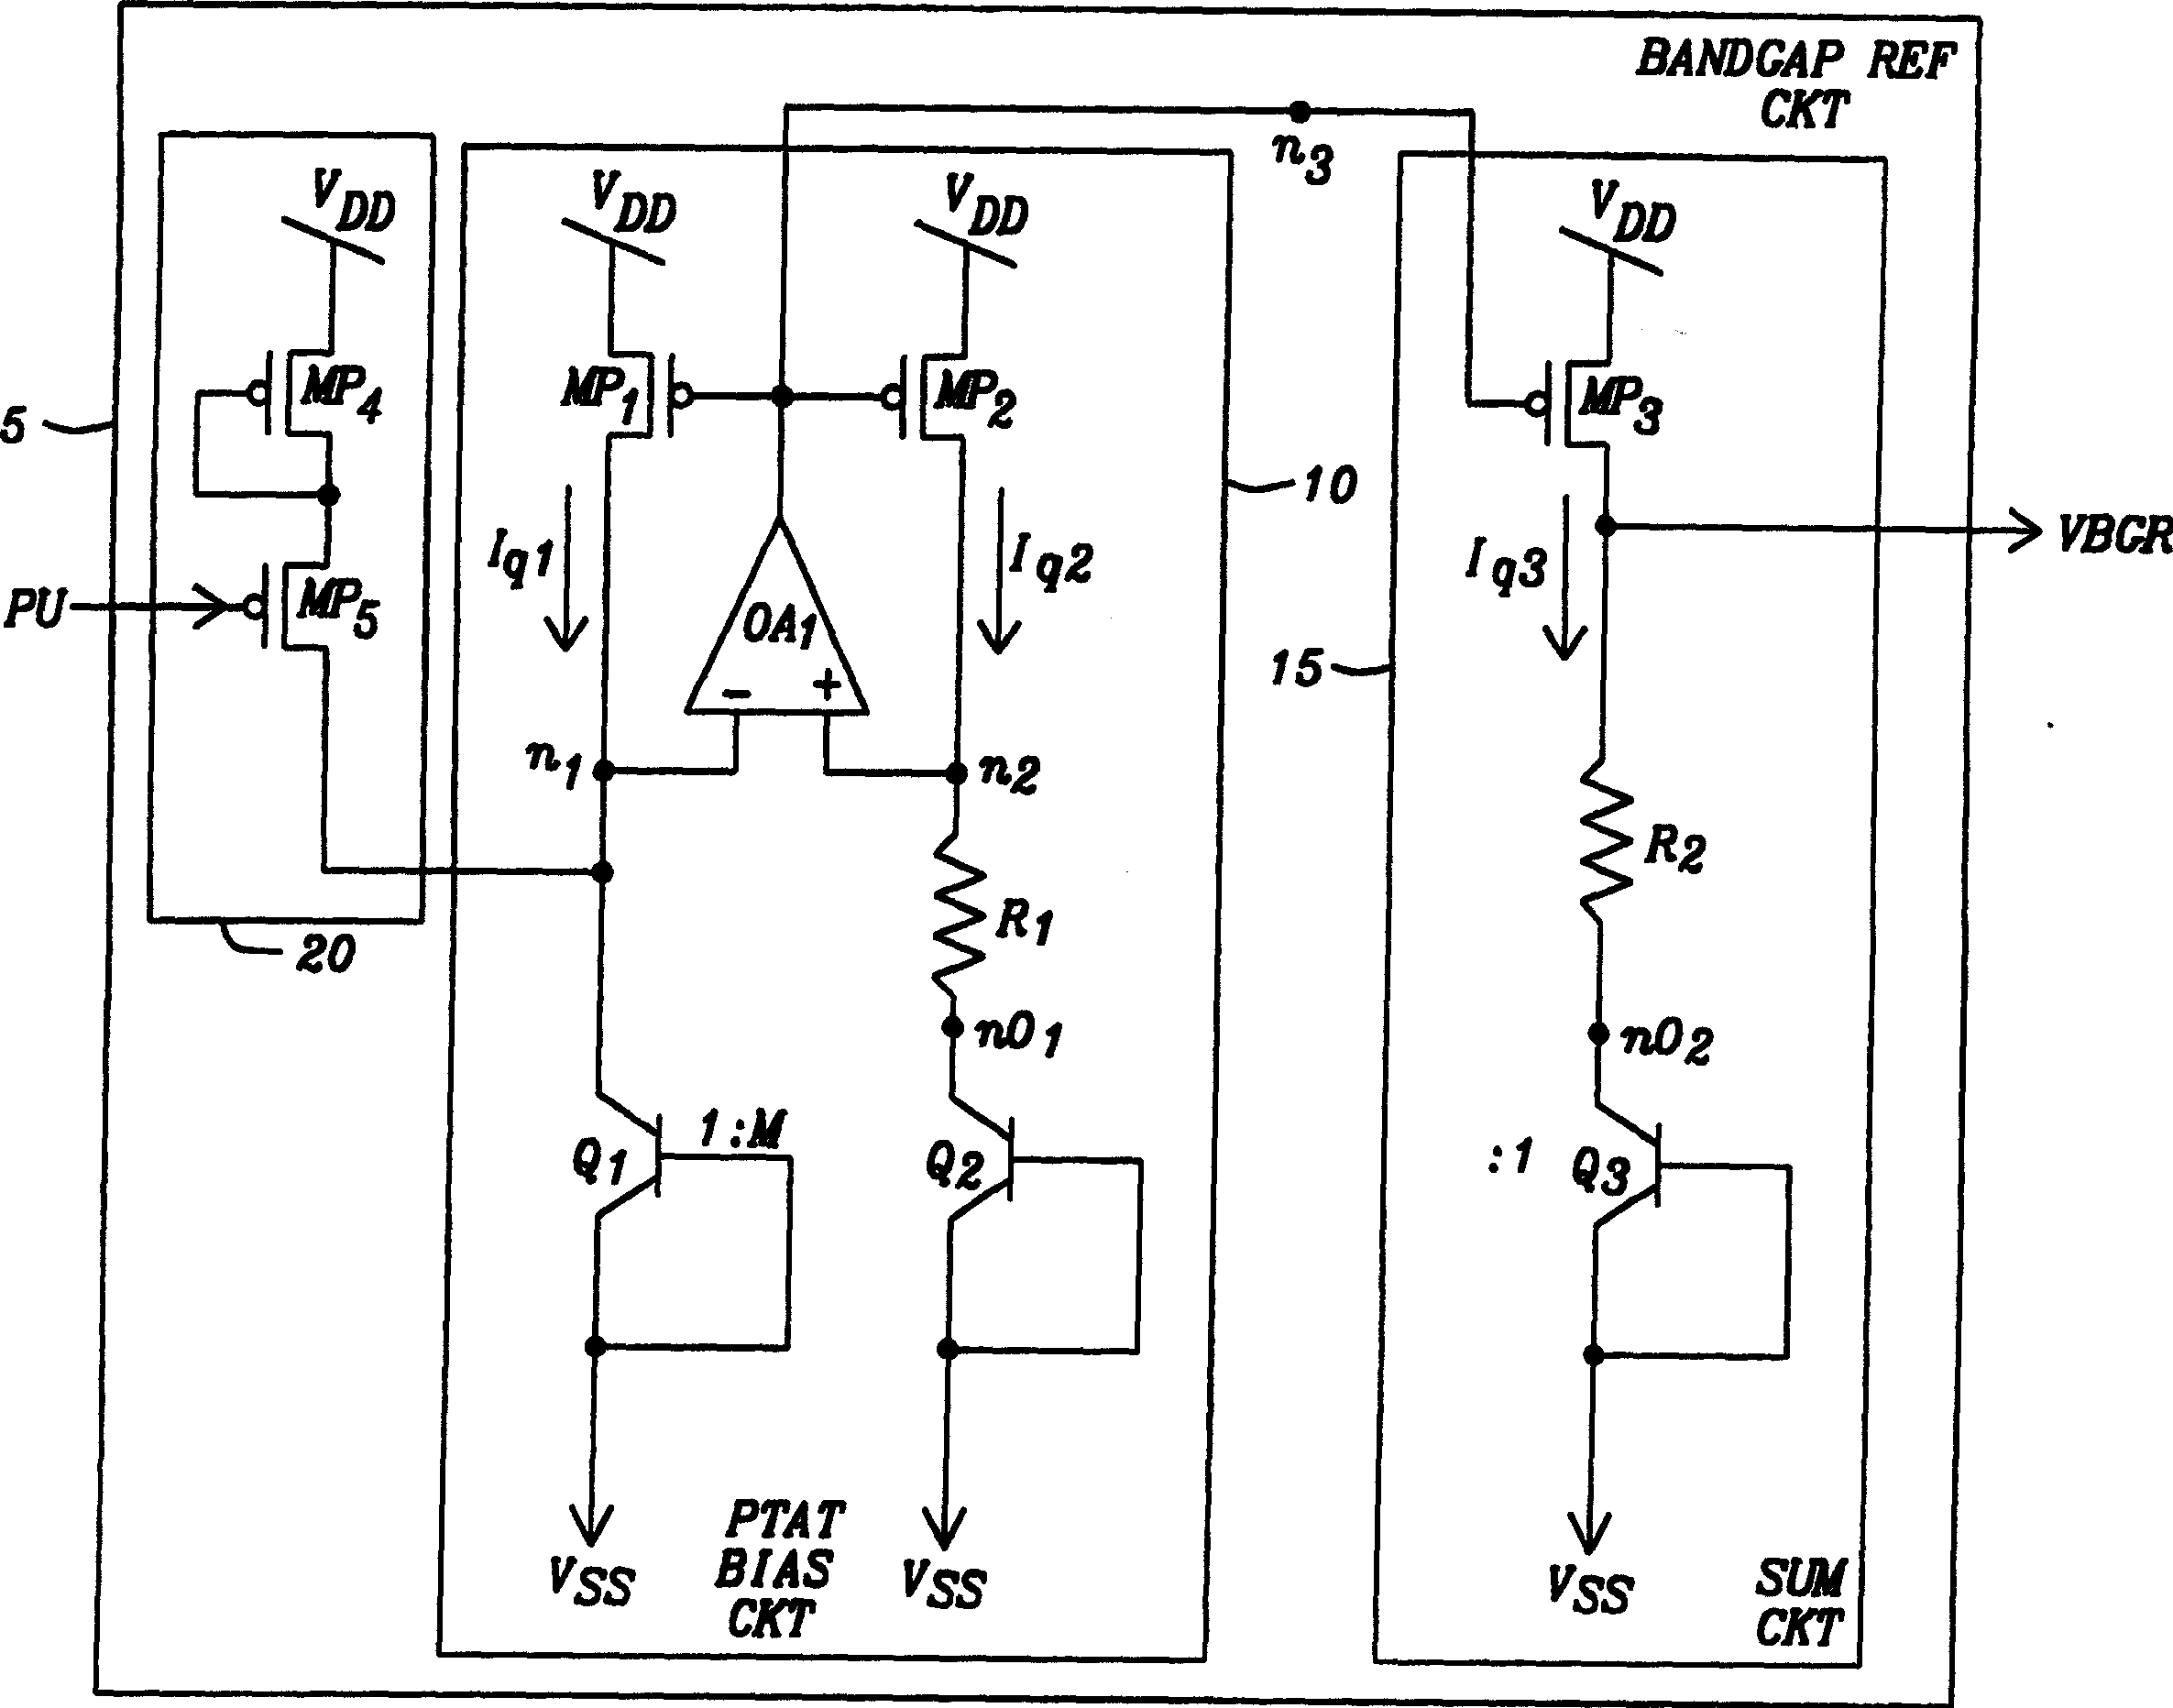 Initial acceleration circuit for dias circuit proportional to absolute temp